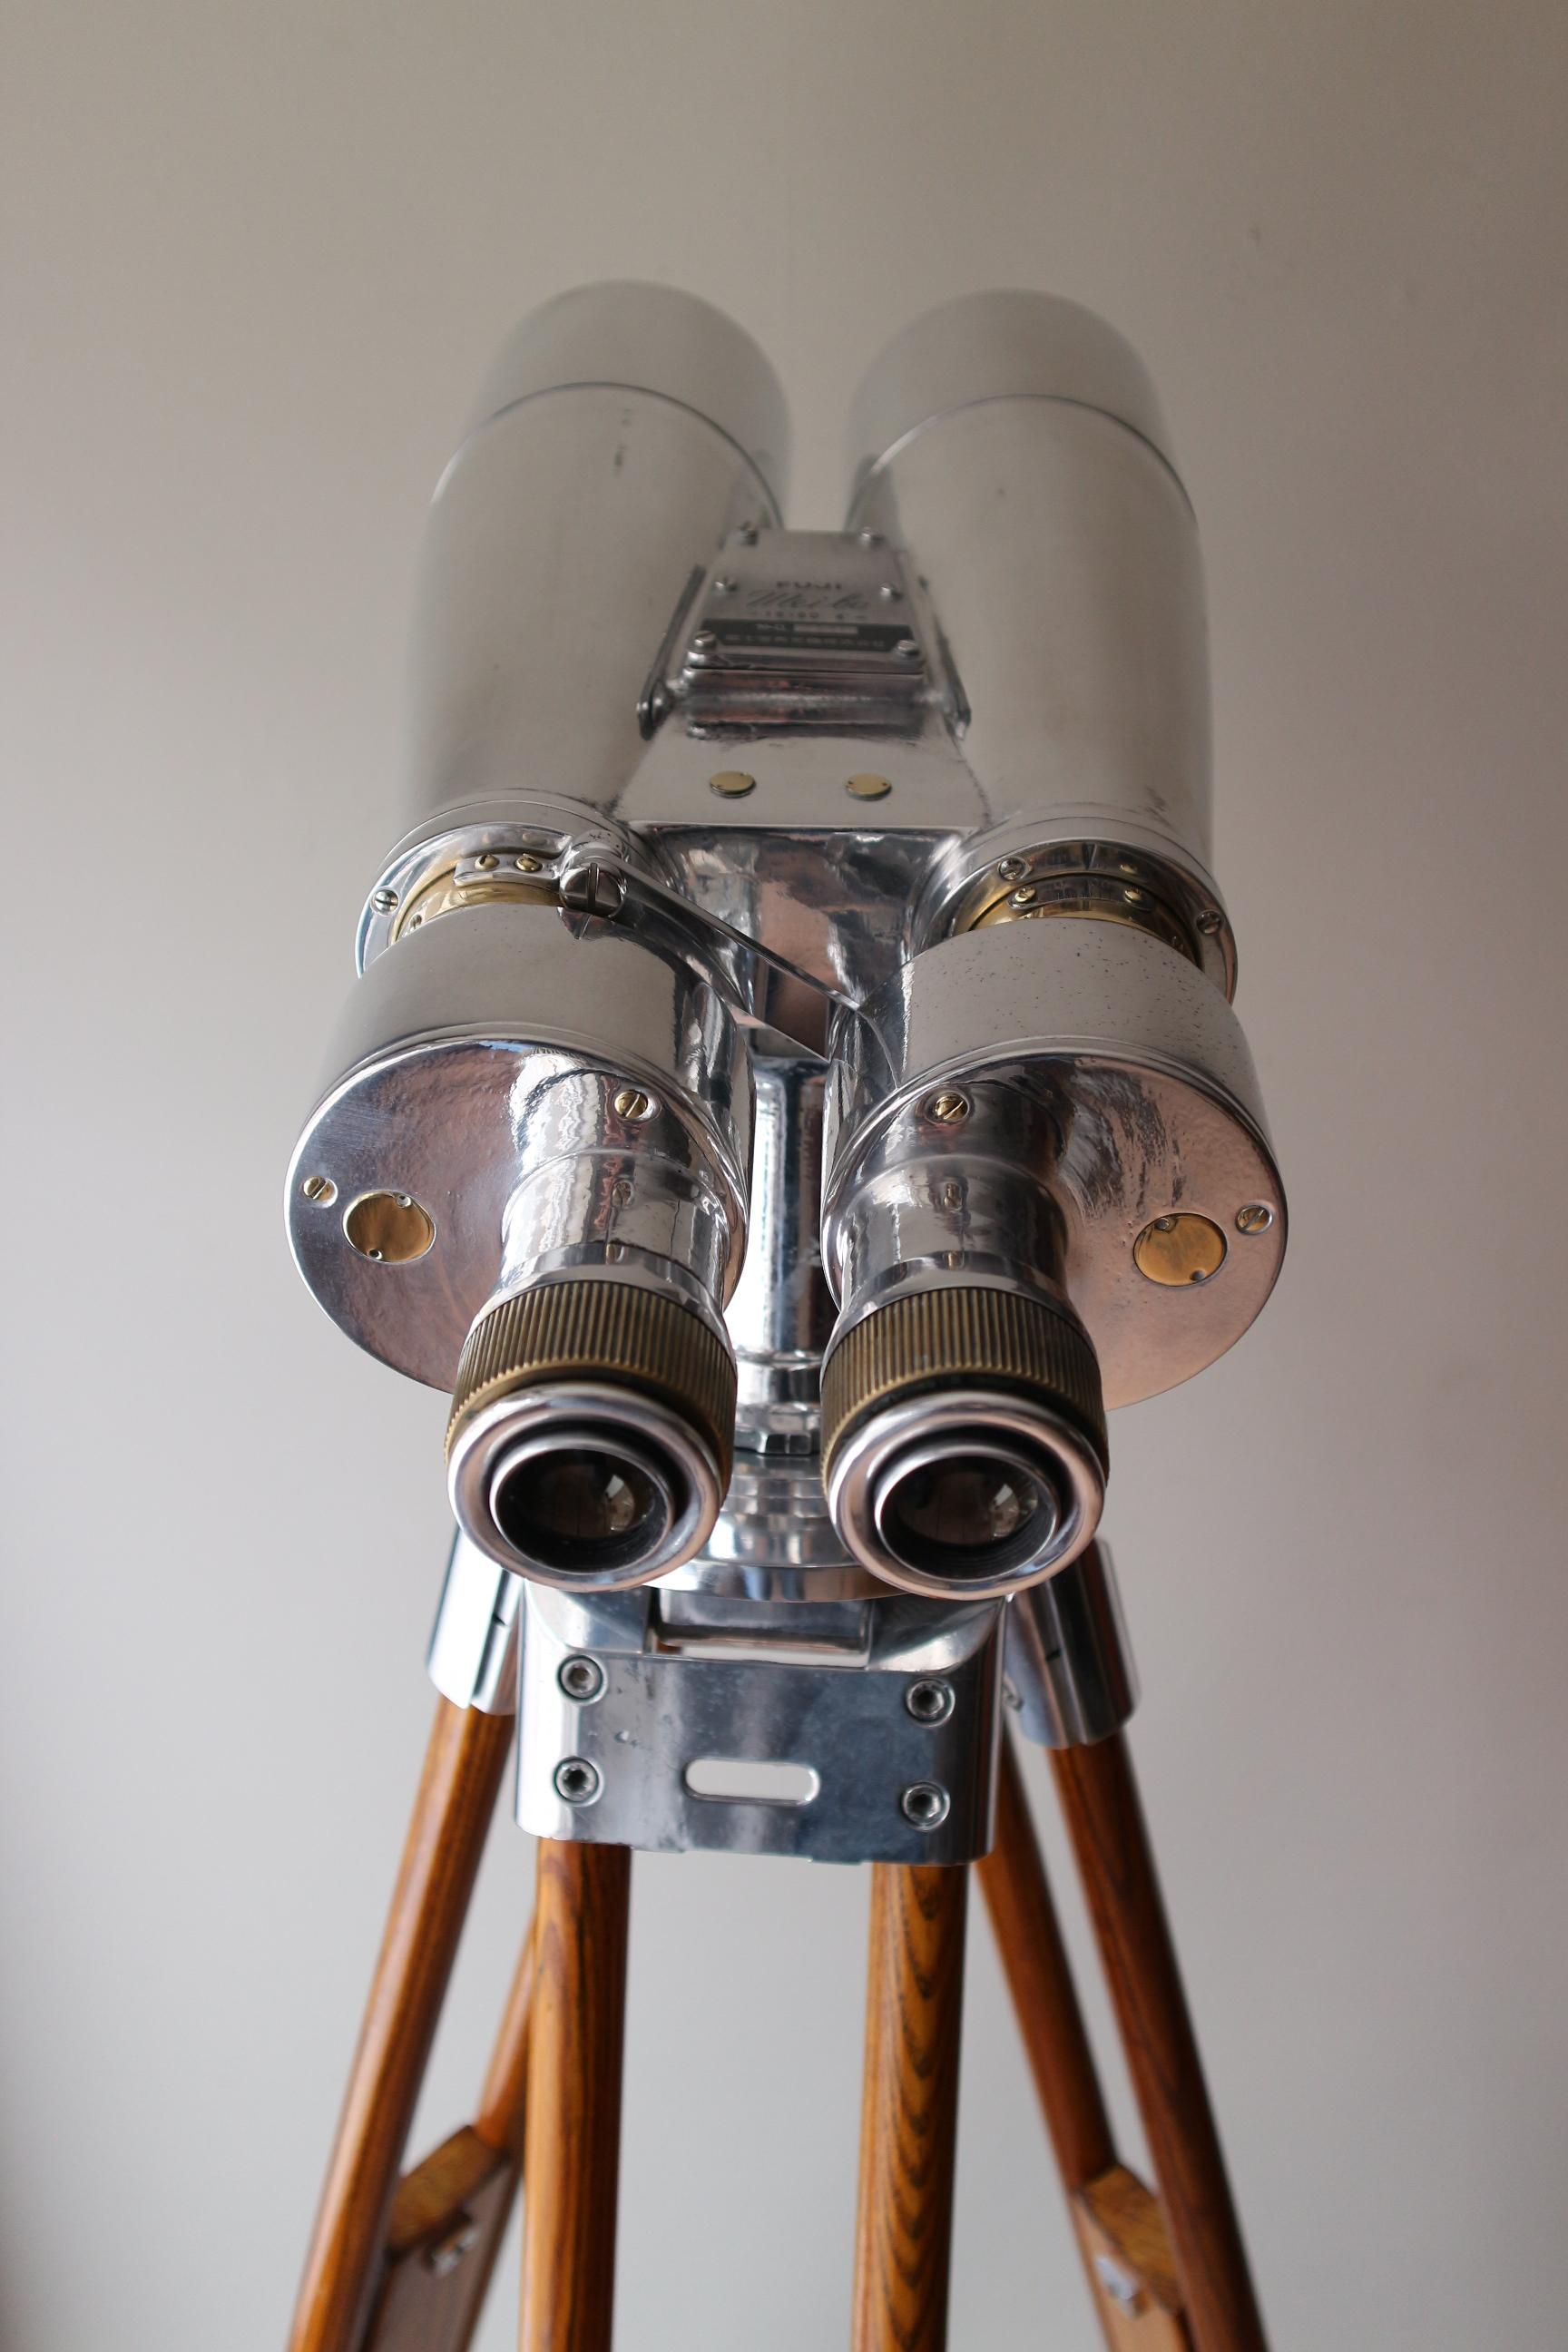 Mid-20th Century Big and Powerful Japanese Observation Binoculars Made by Fuji, circa 1950